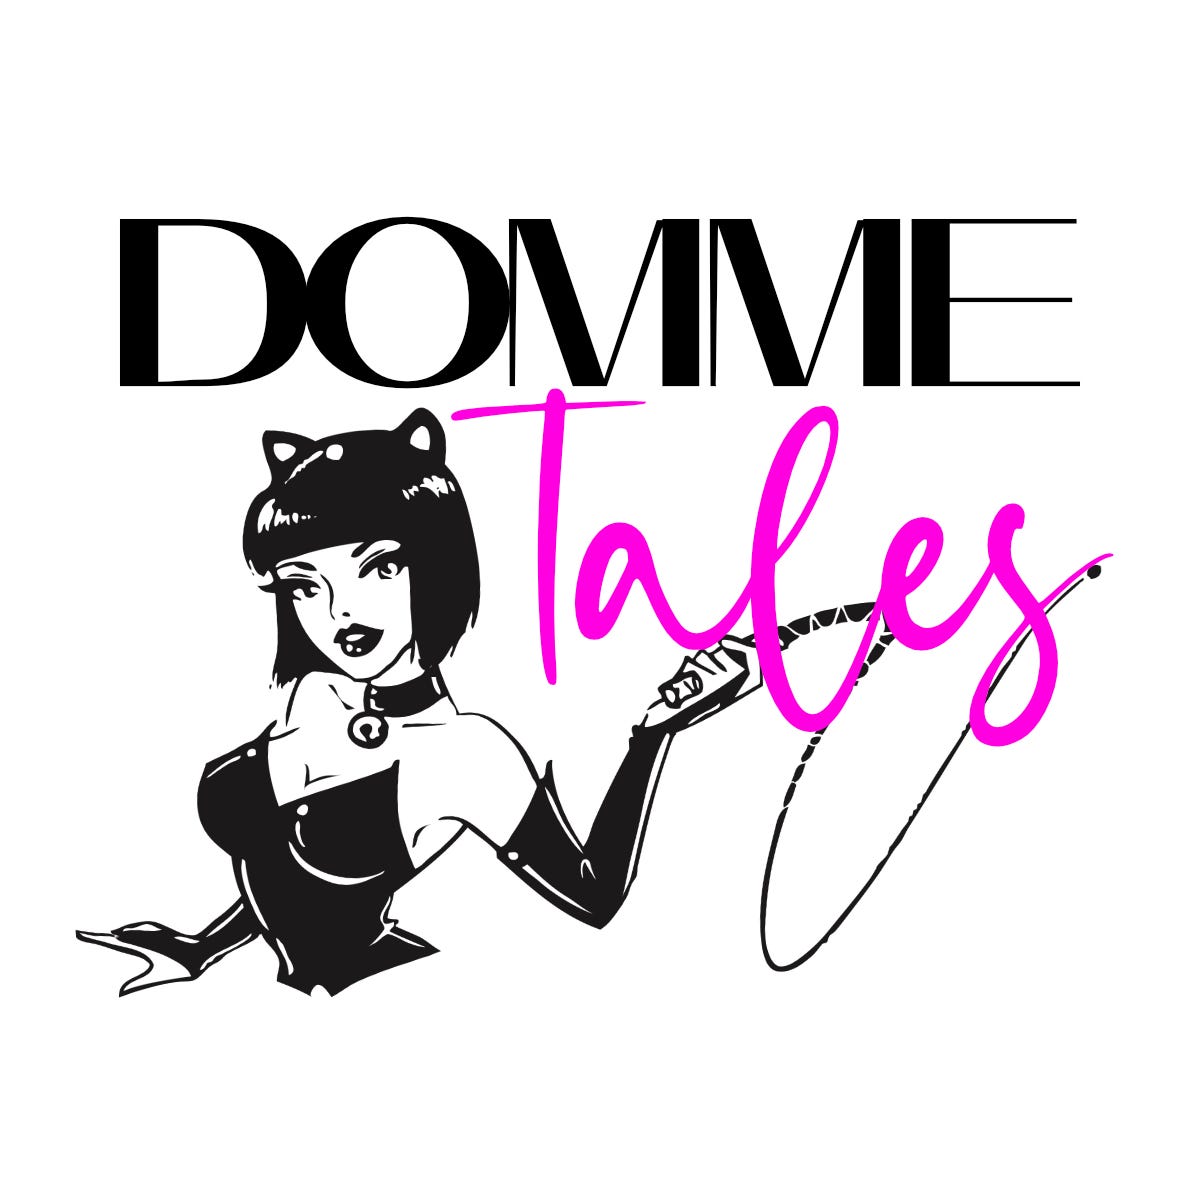 About Domme Tales